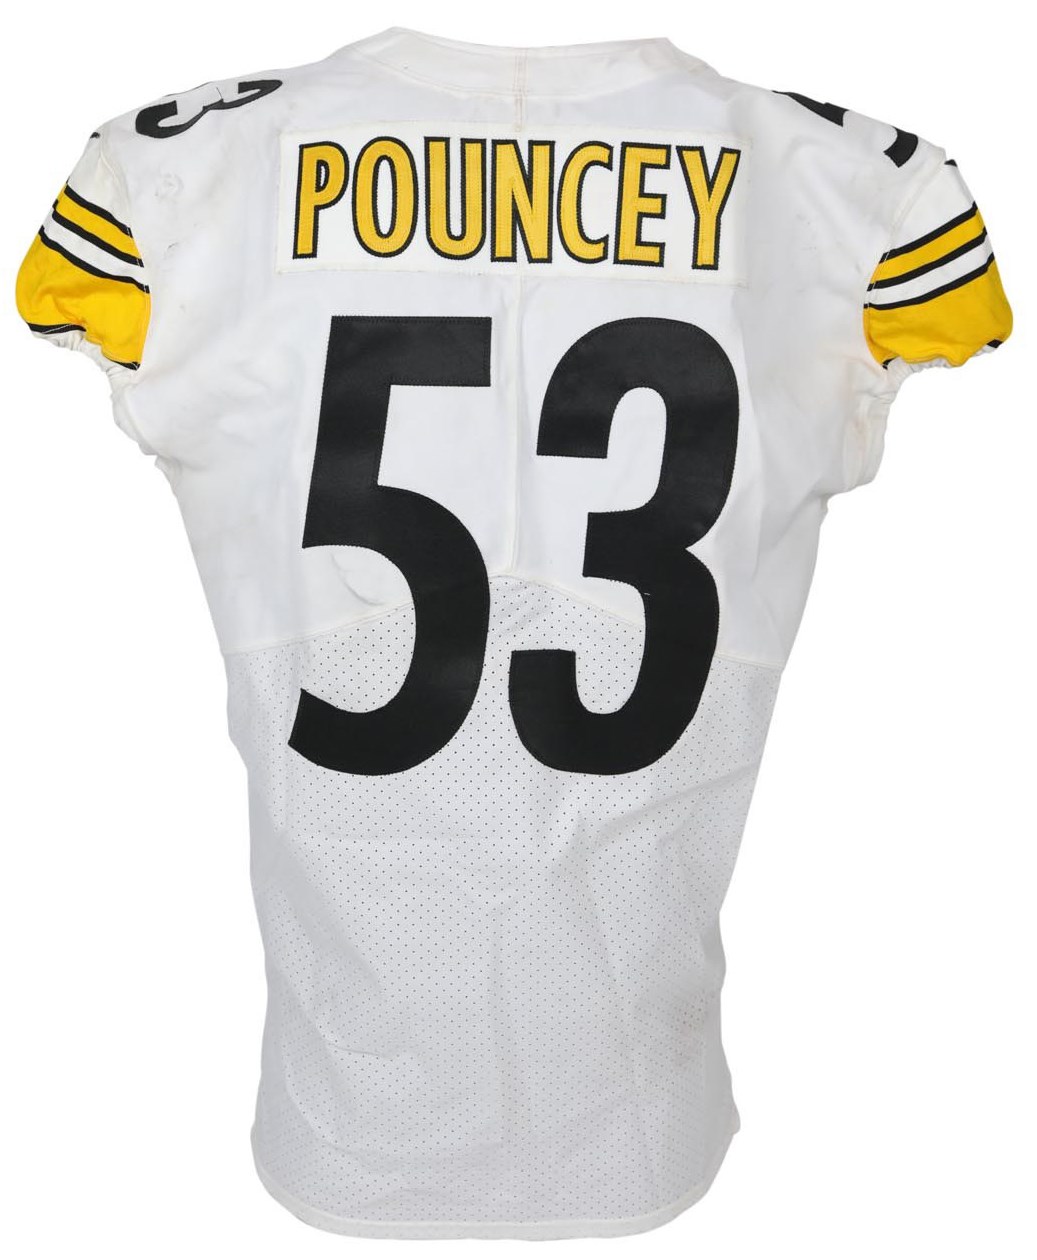 Football - 2017 Maurkice Pouncey Game Worn Pittsburgh Steelers Jersey (Photo-Matched)